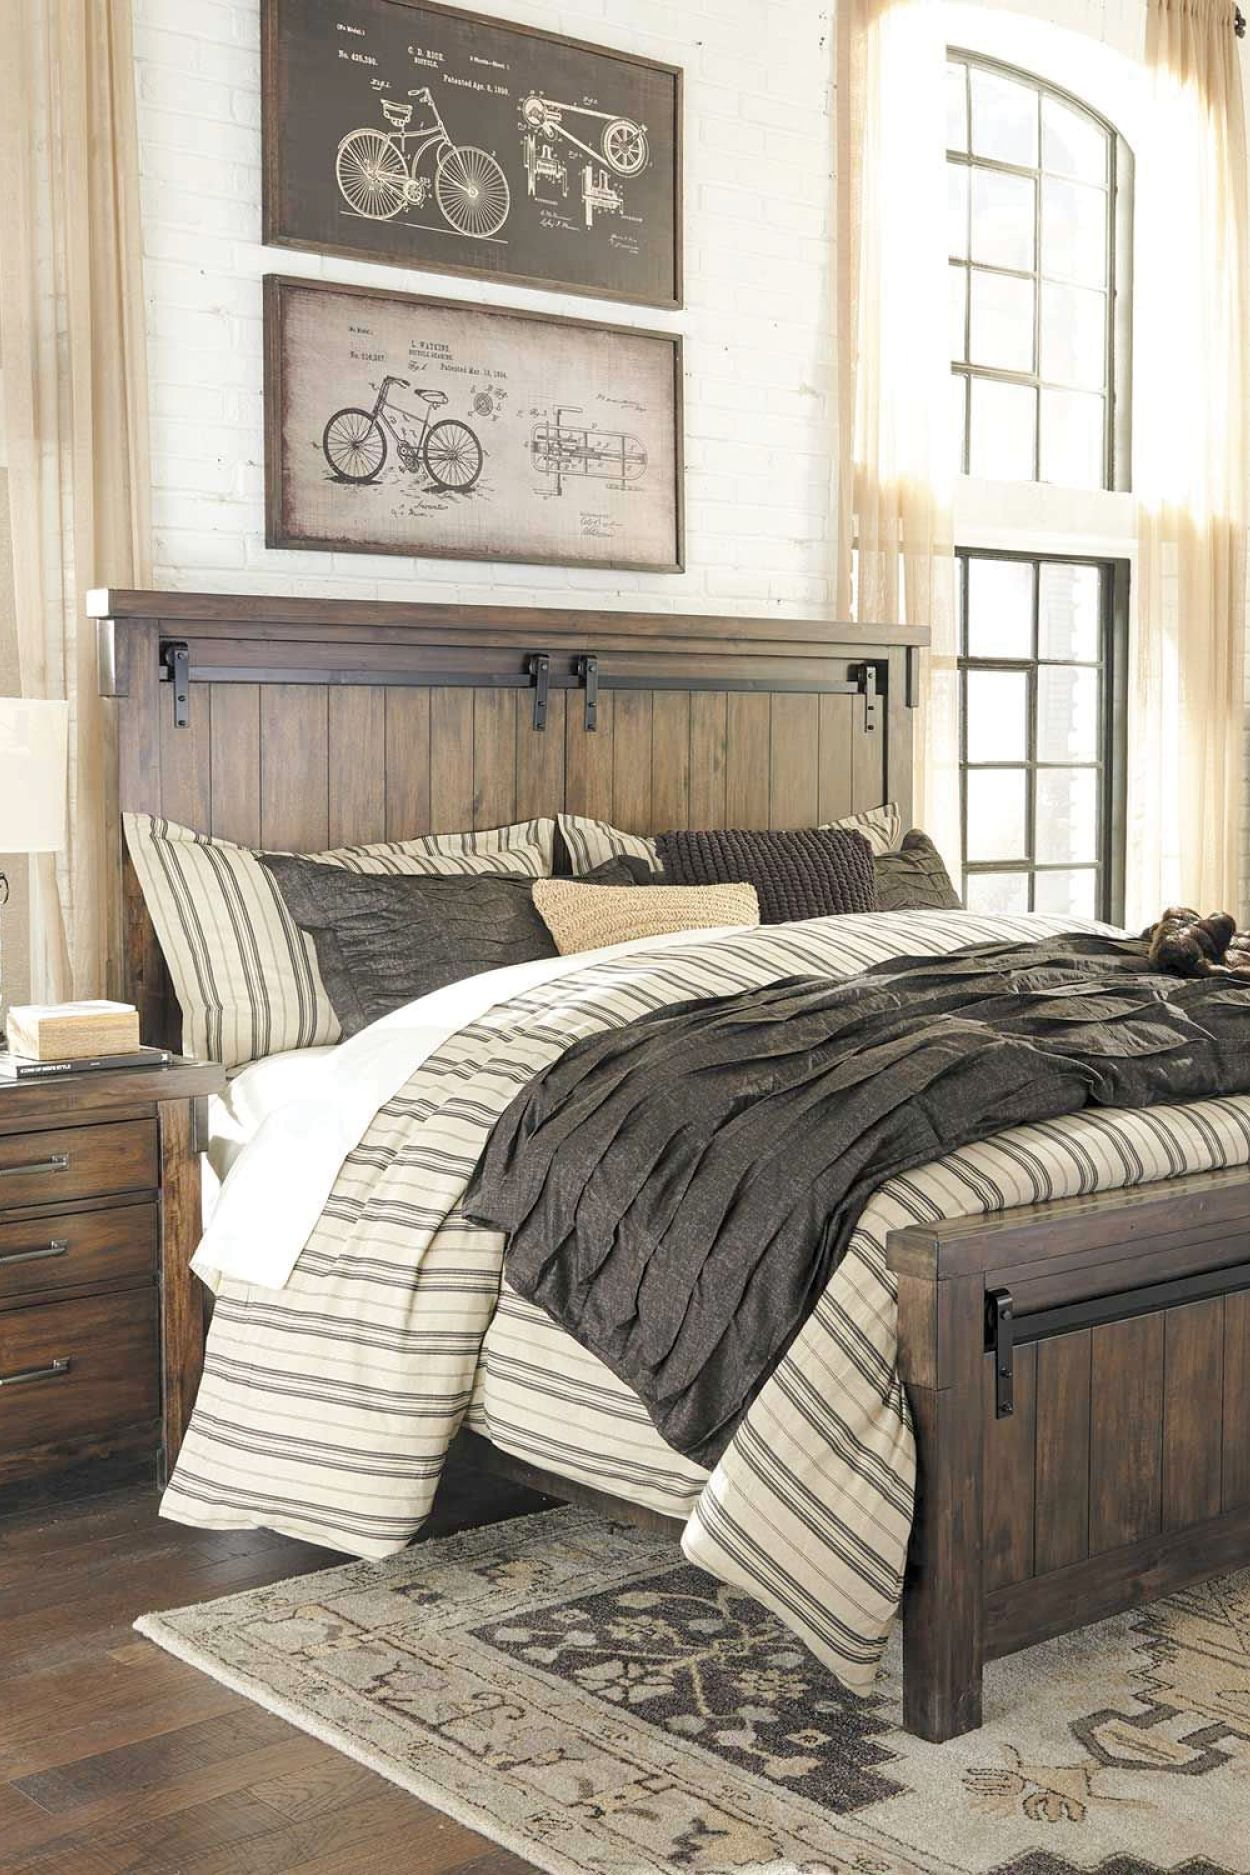 Lakeleigh 5 Piece Bedroom Set In 2019 Paidboard Rustic with regard to dimensions 1250 X 1875